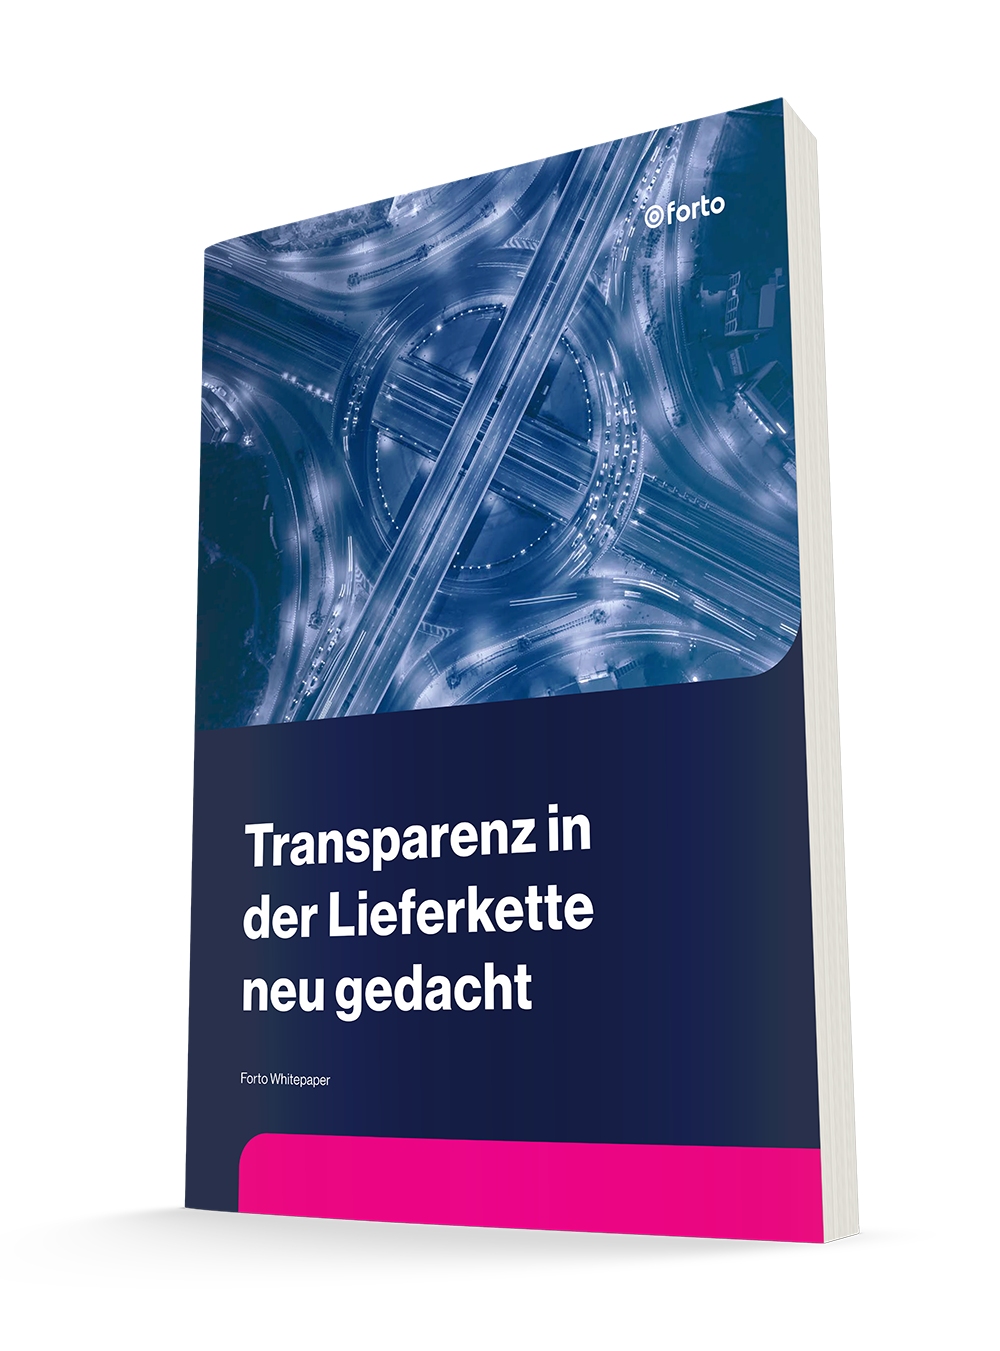 Rethinking transparency white paper cover